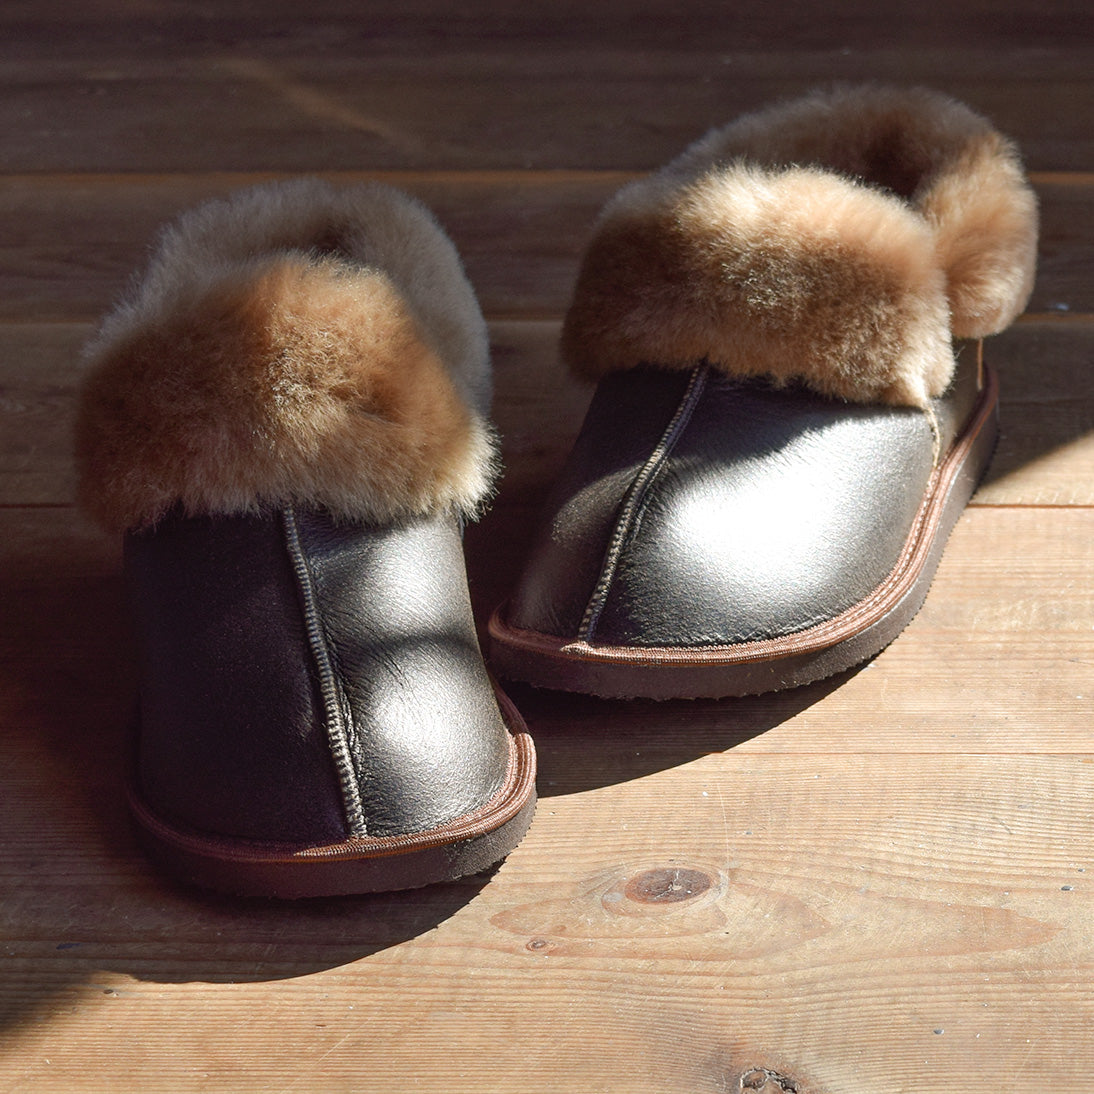 Bluebelle Fawn Sheepskin Slippers Discover leather & suede ankle boots,  boots, sandals & trainers at Carl Scarpa.com